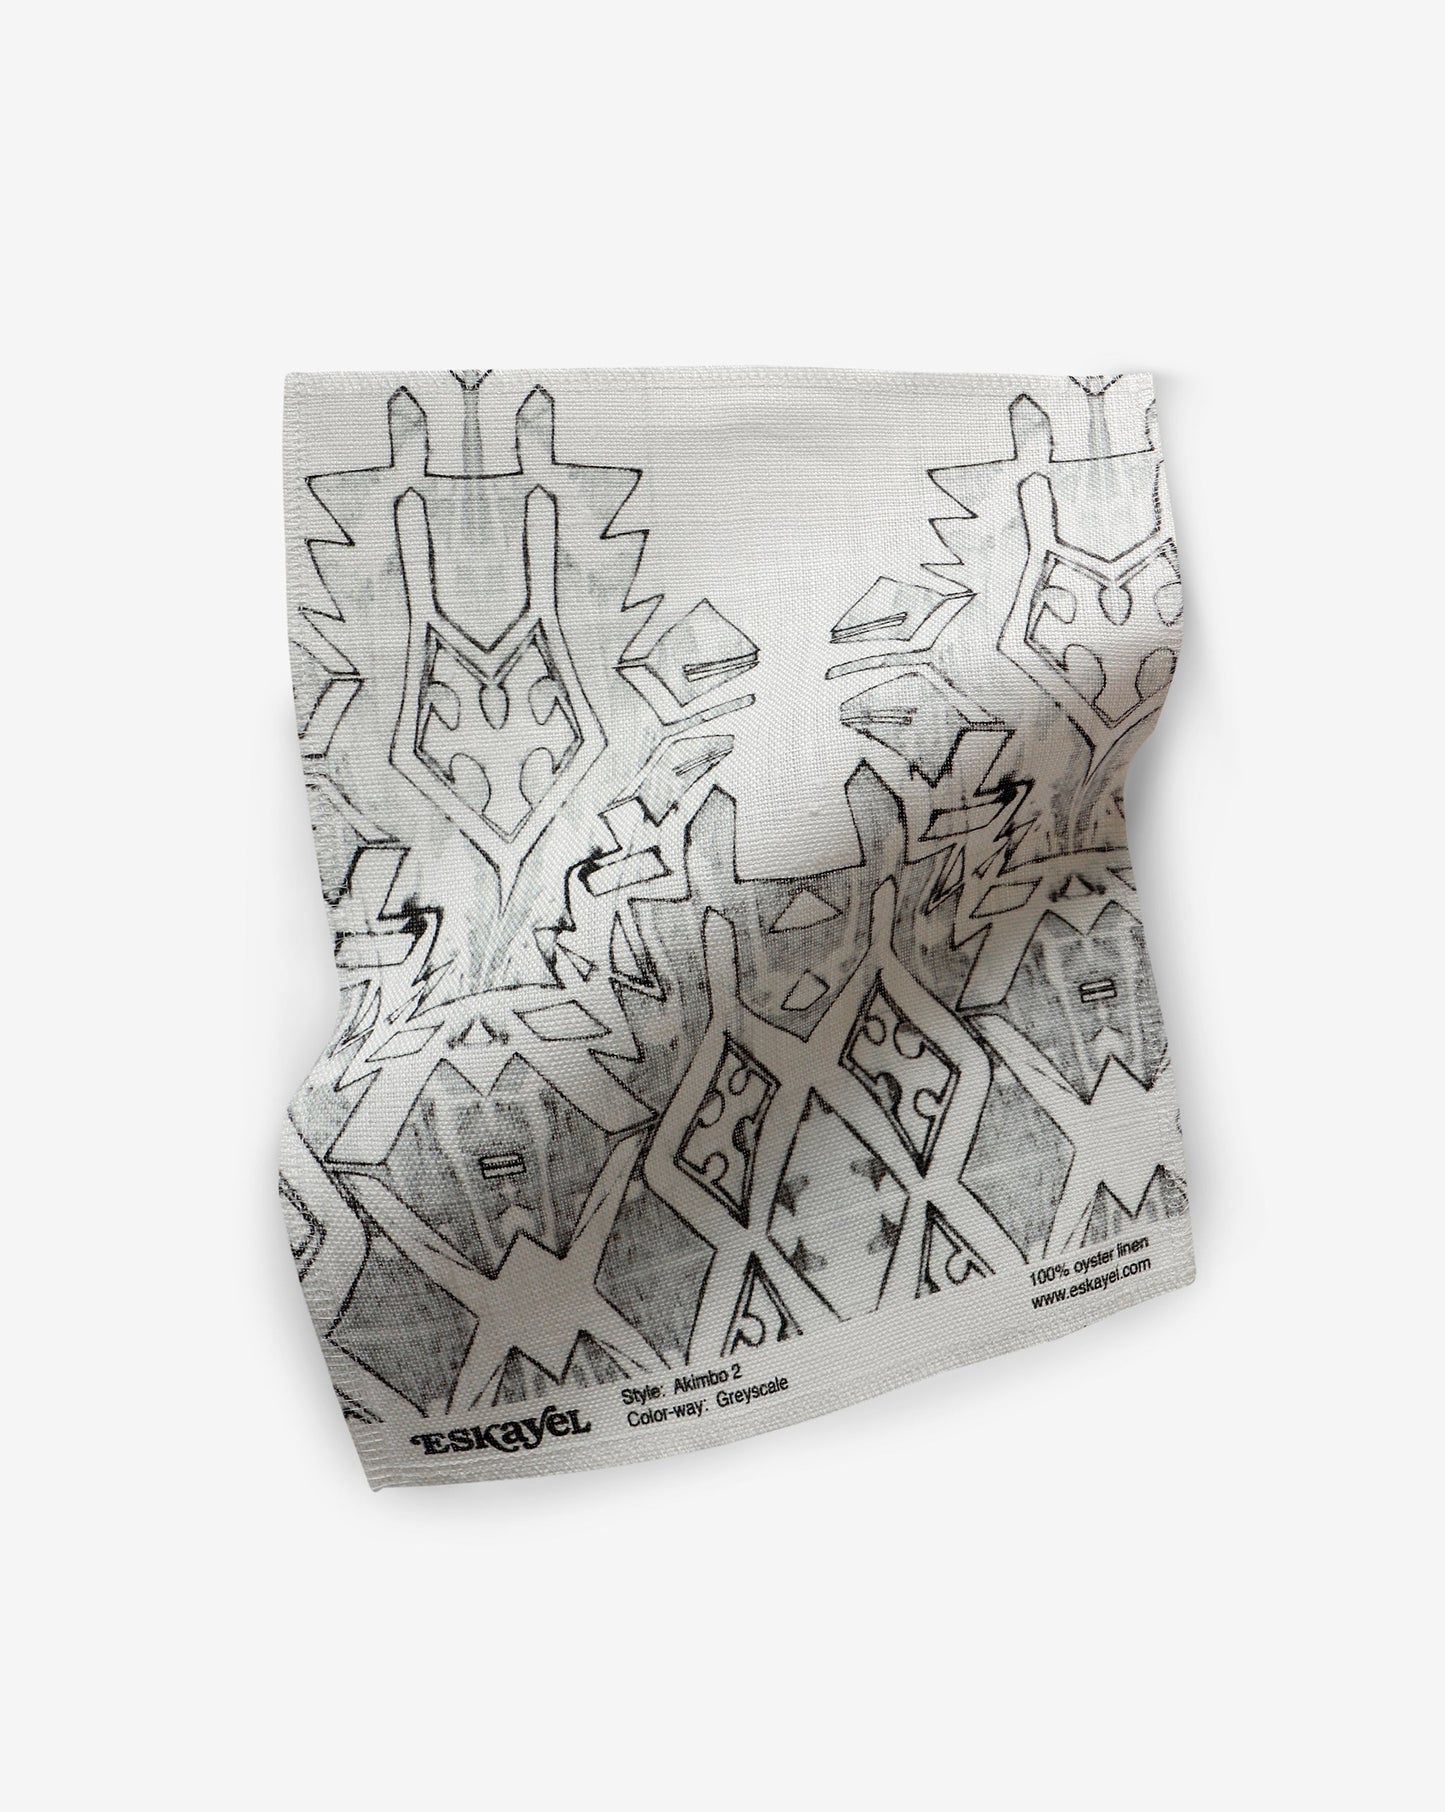 A black and white graphic geometric pattern on the Akimbo 2 Fabric||Greyscale.